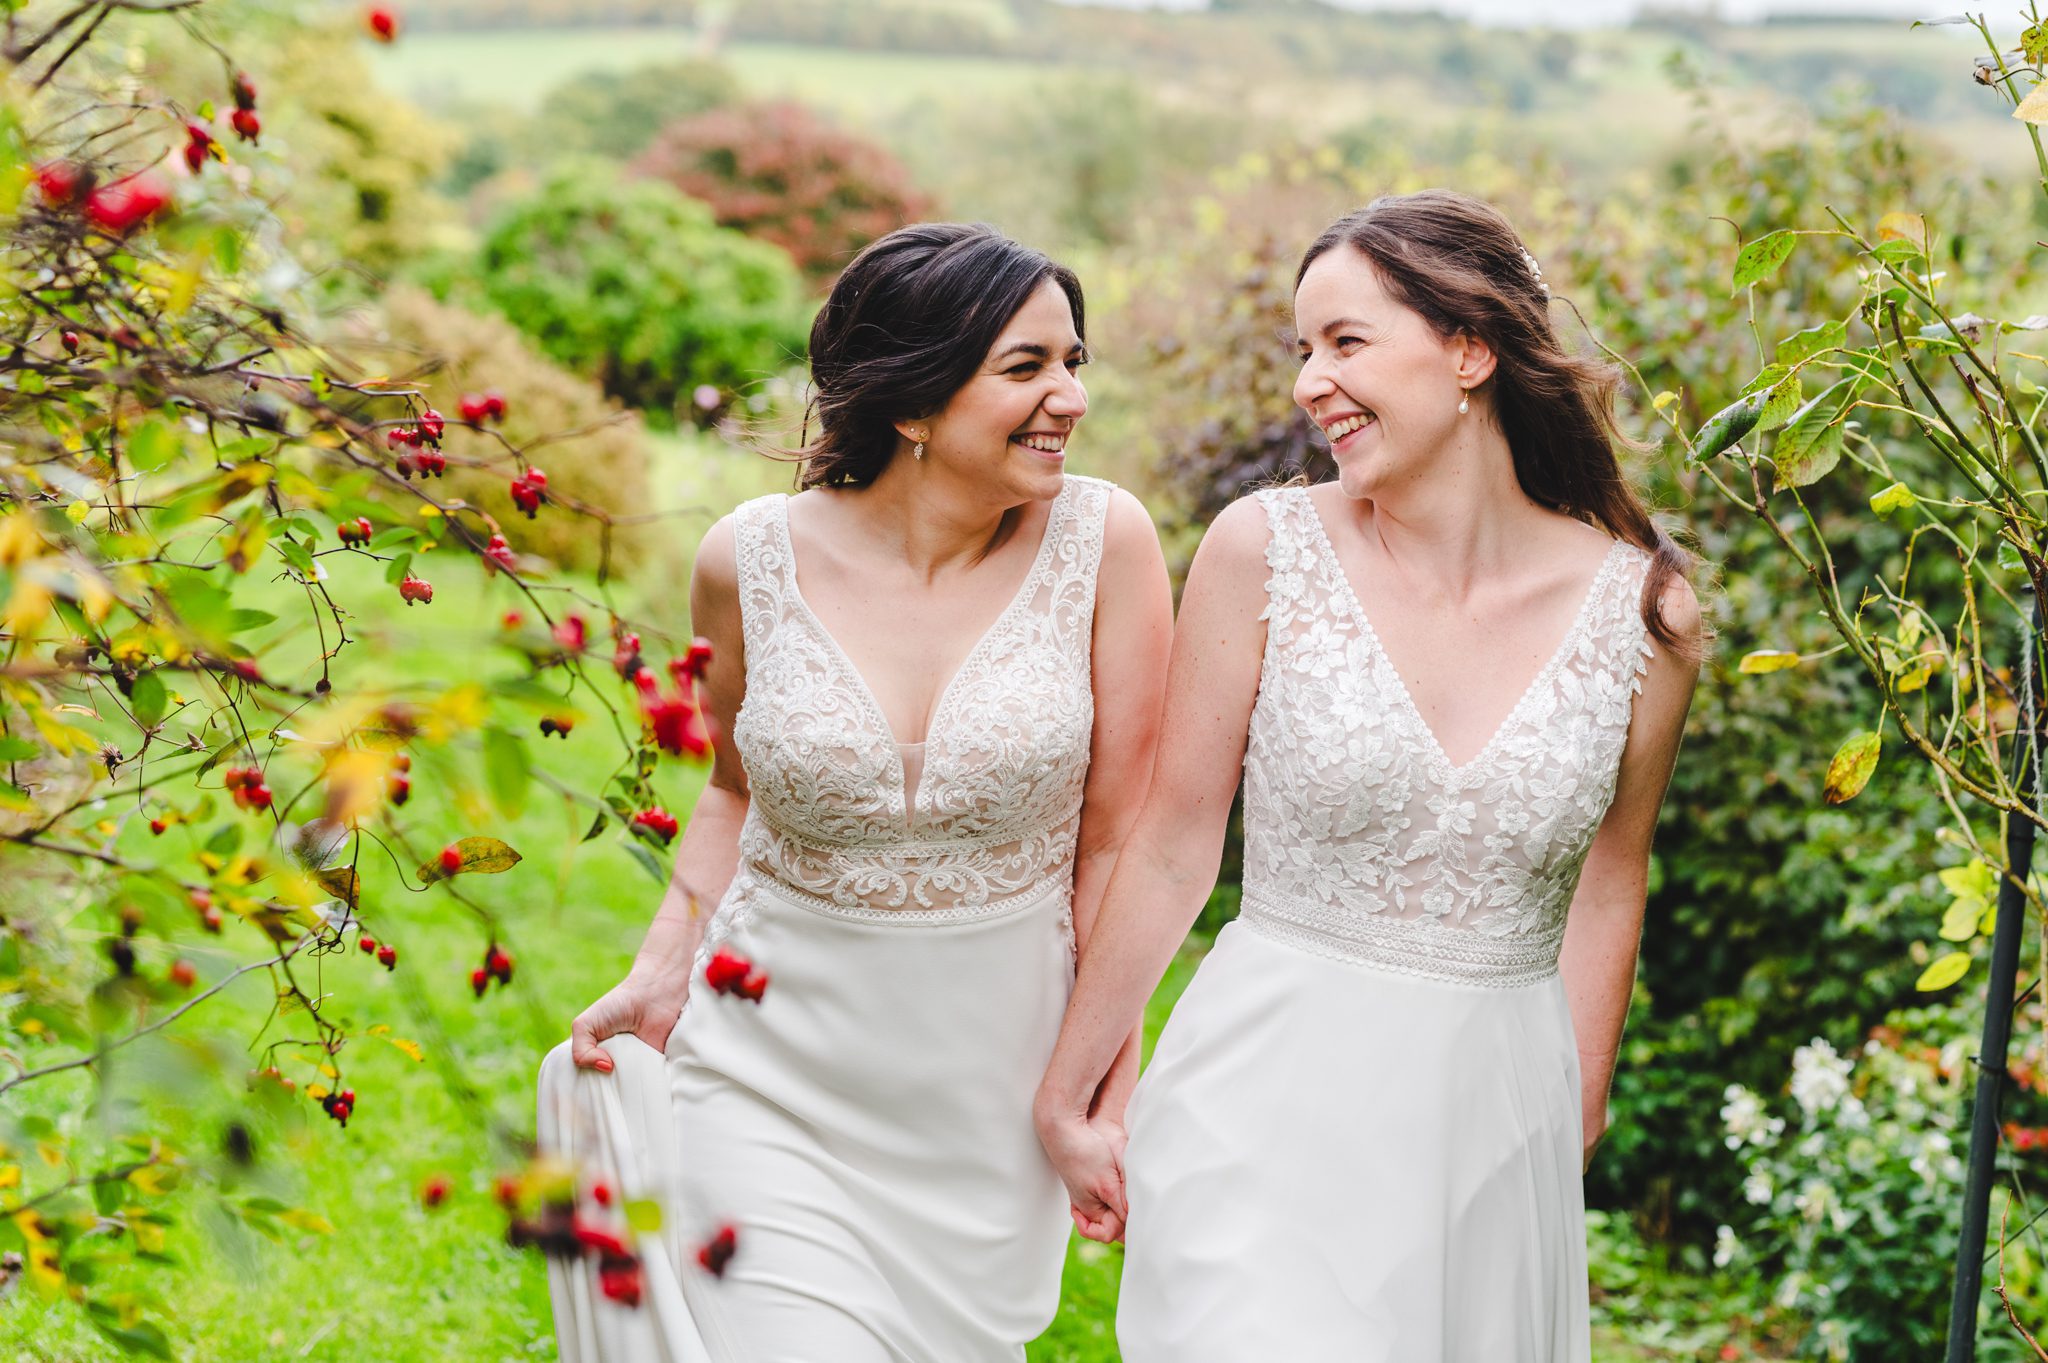 Two women married at Upcote barn surrounded by red berries and green fields